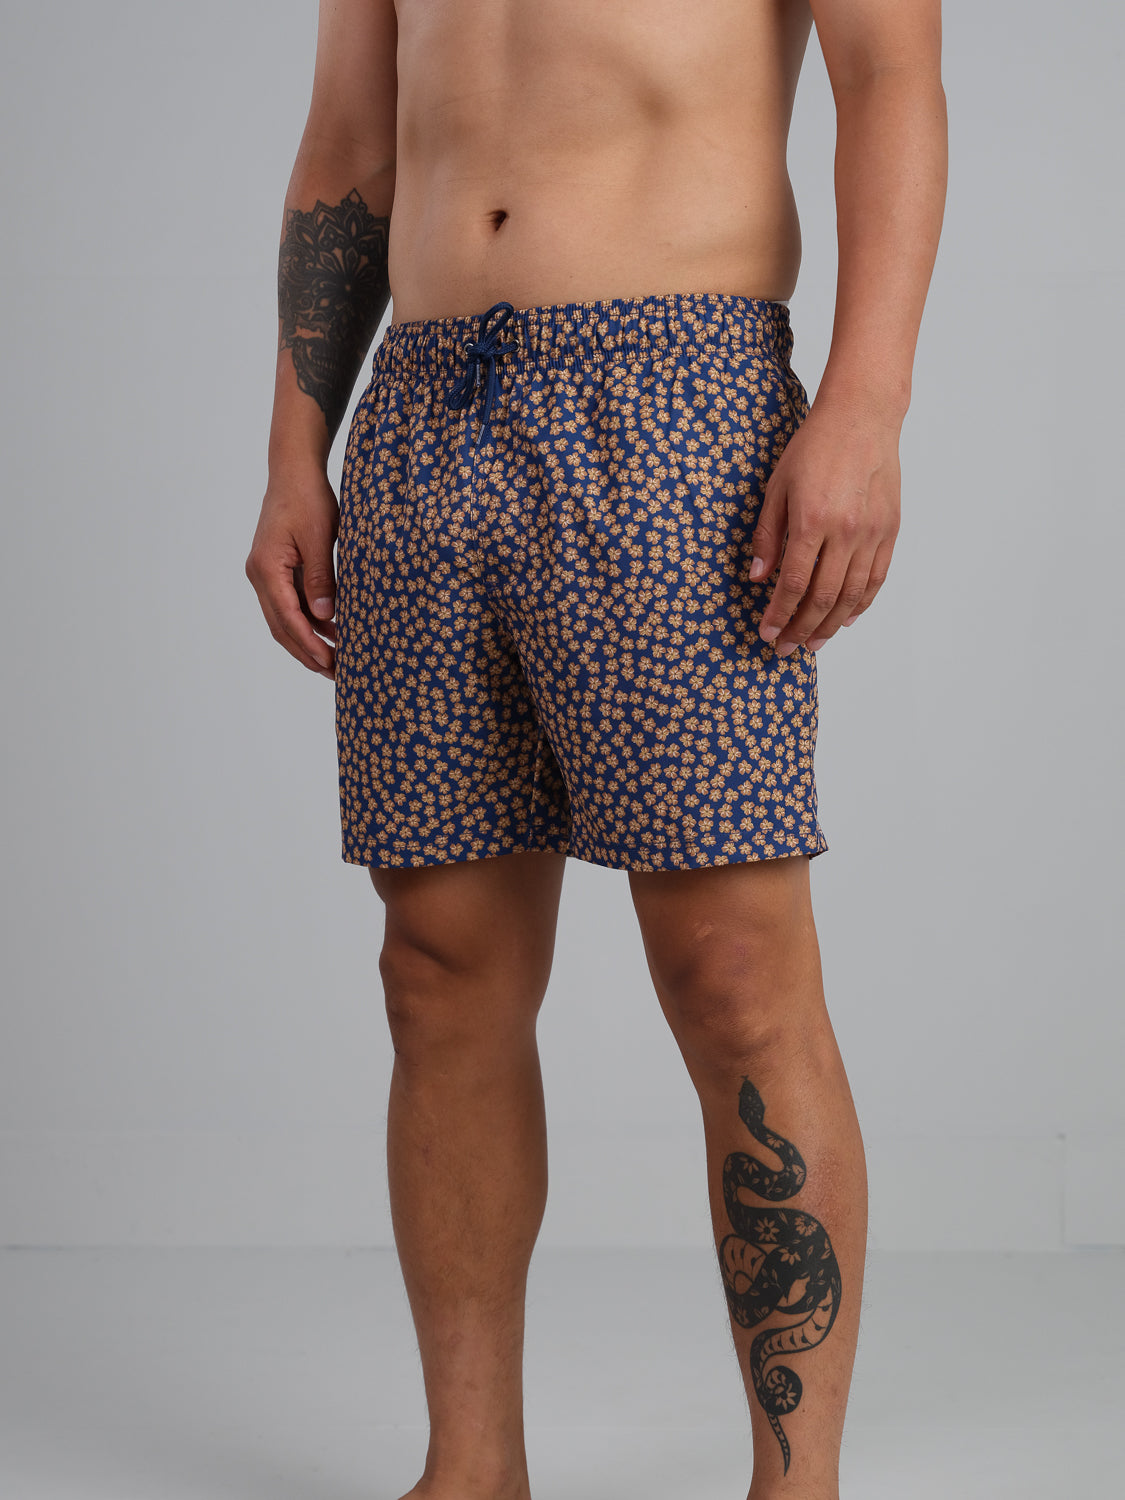 Ohau Floral Printed Swim Trunk with Fast Dry and Stretch